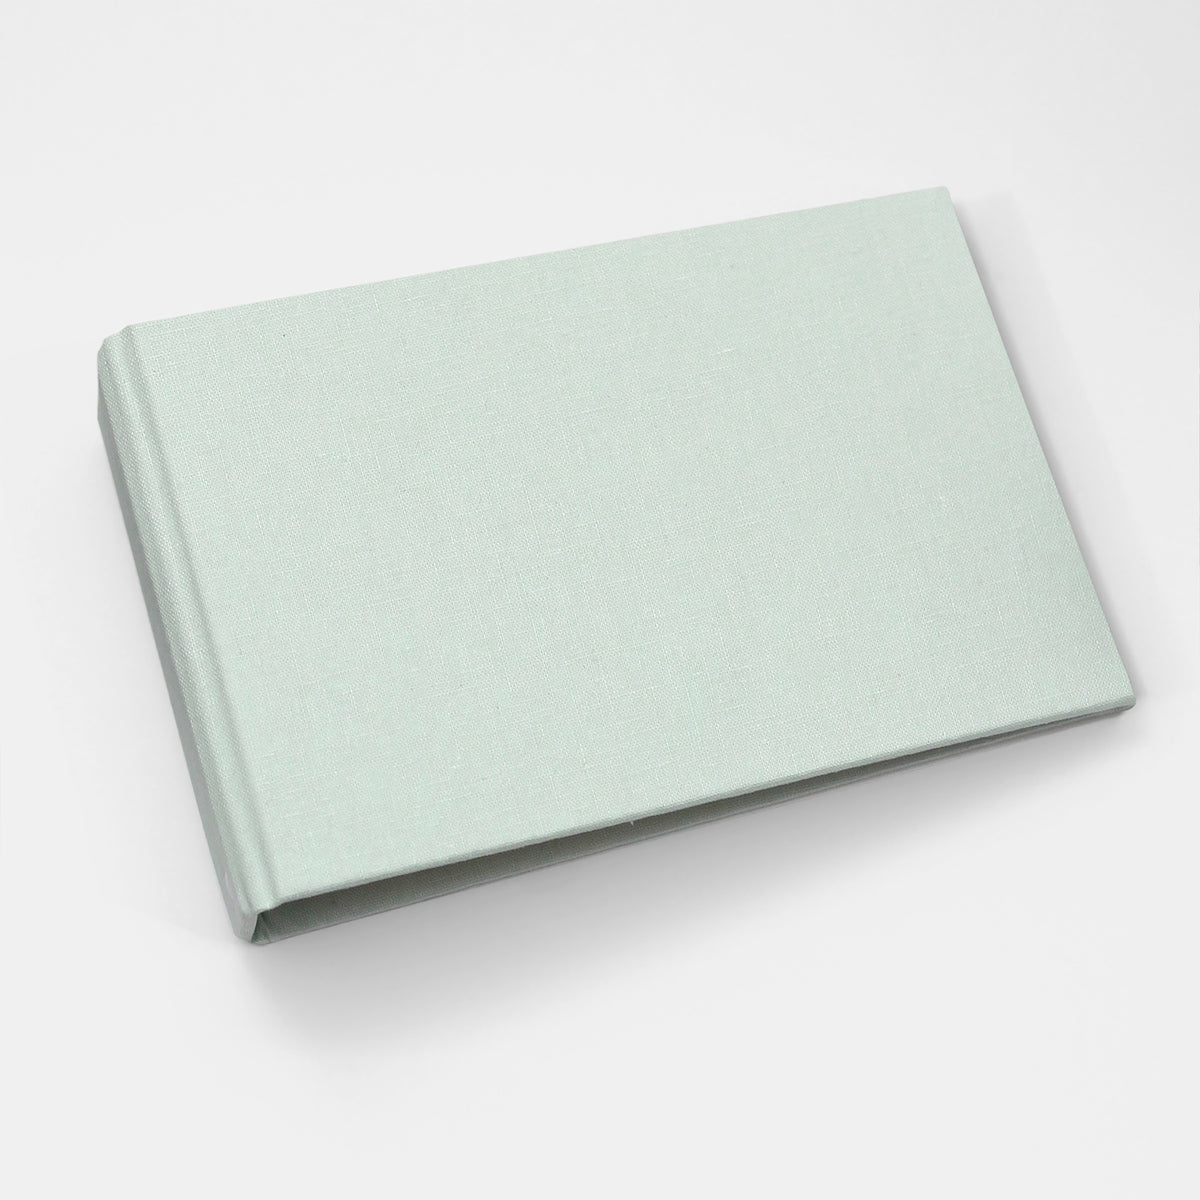 Small Photo Binder | for 4x6 Photos | with Pastel Blue Cotton Cover